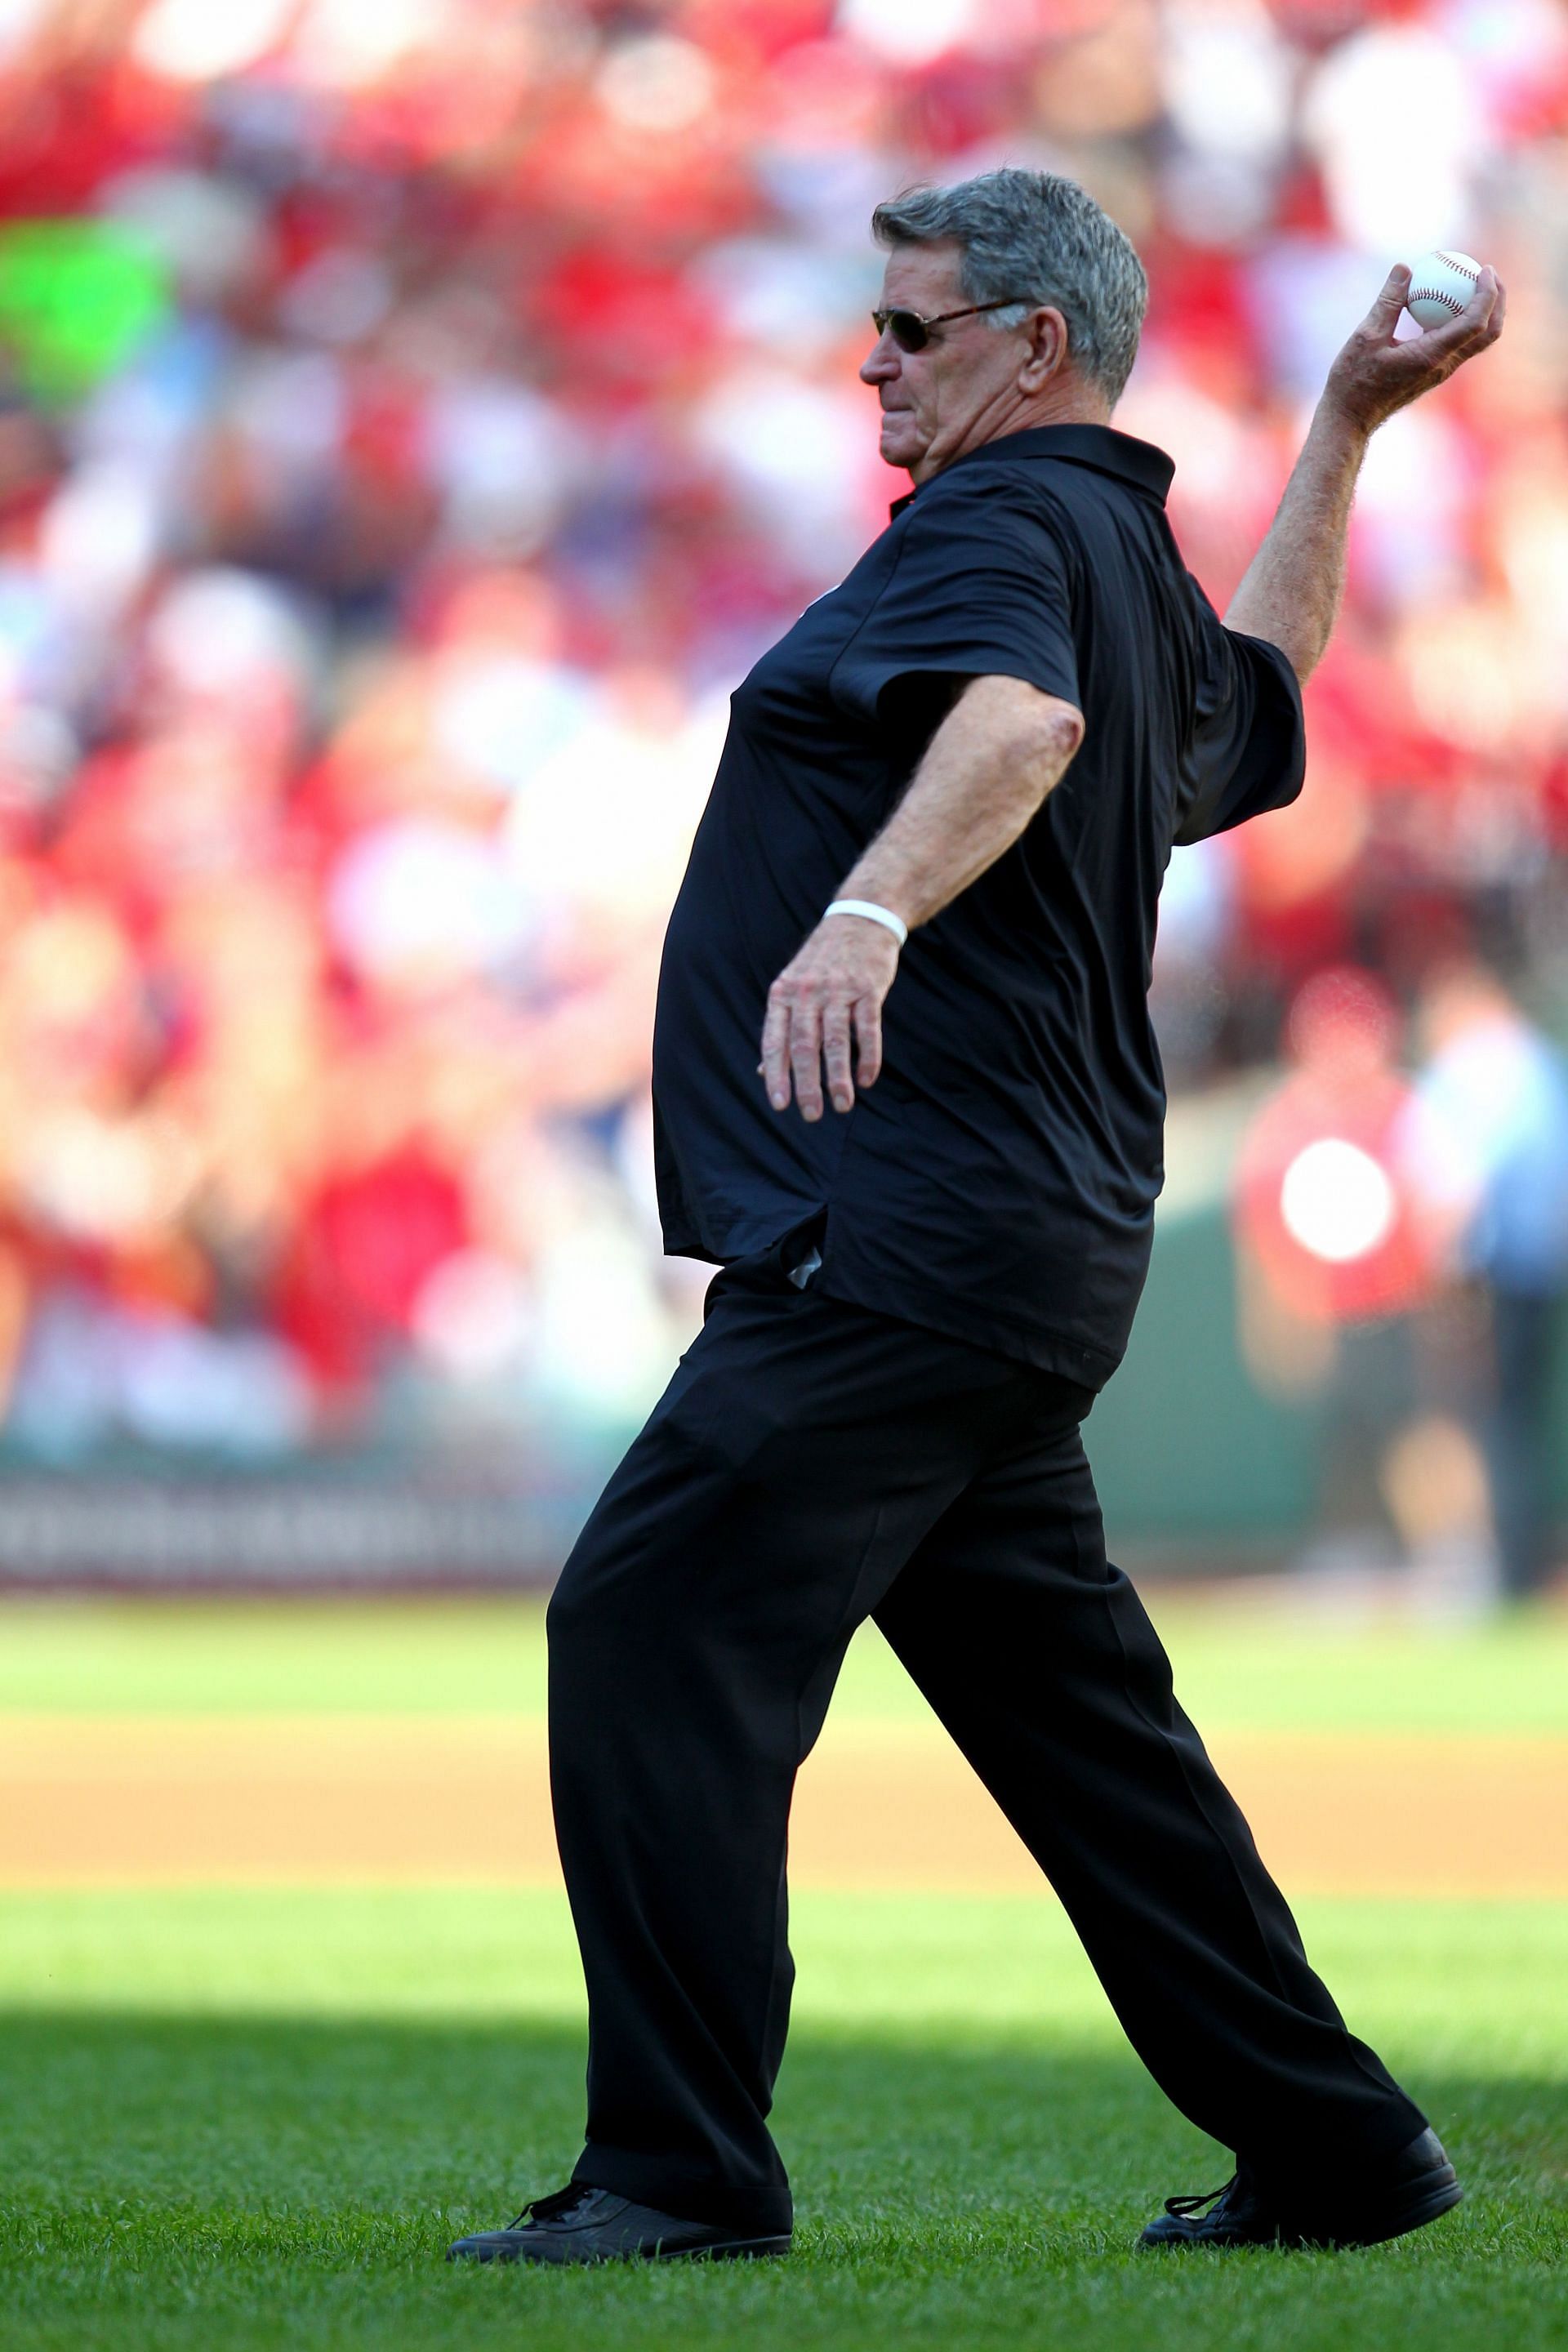 Mike Shannon throwing out a first pitch